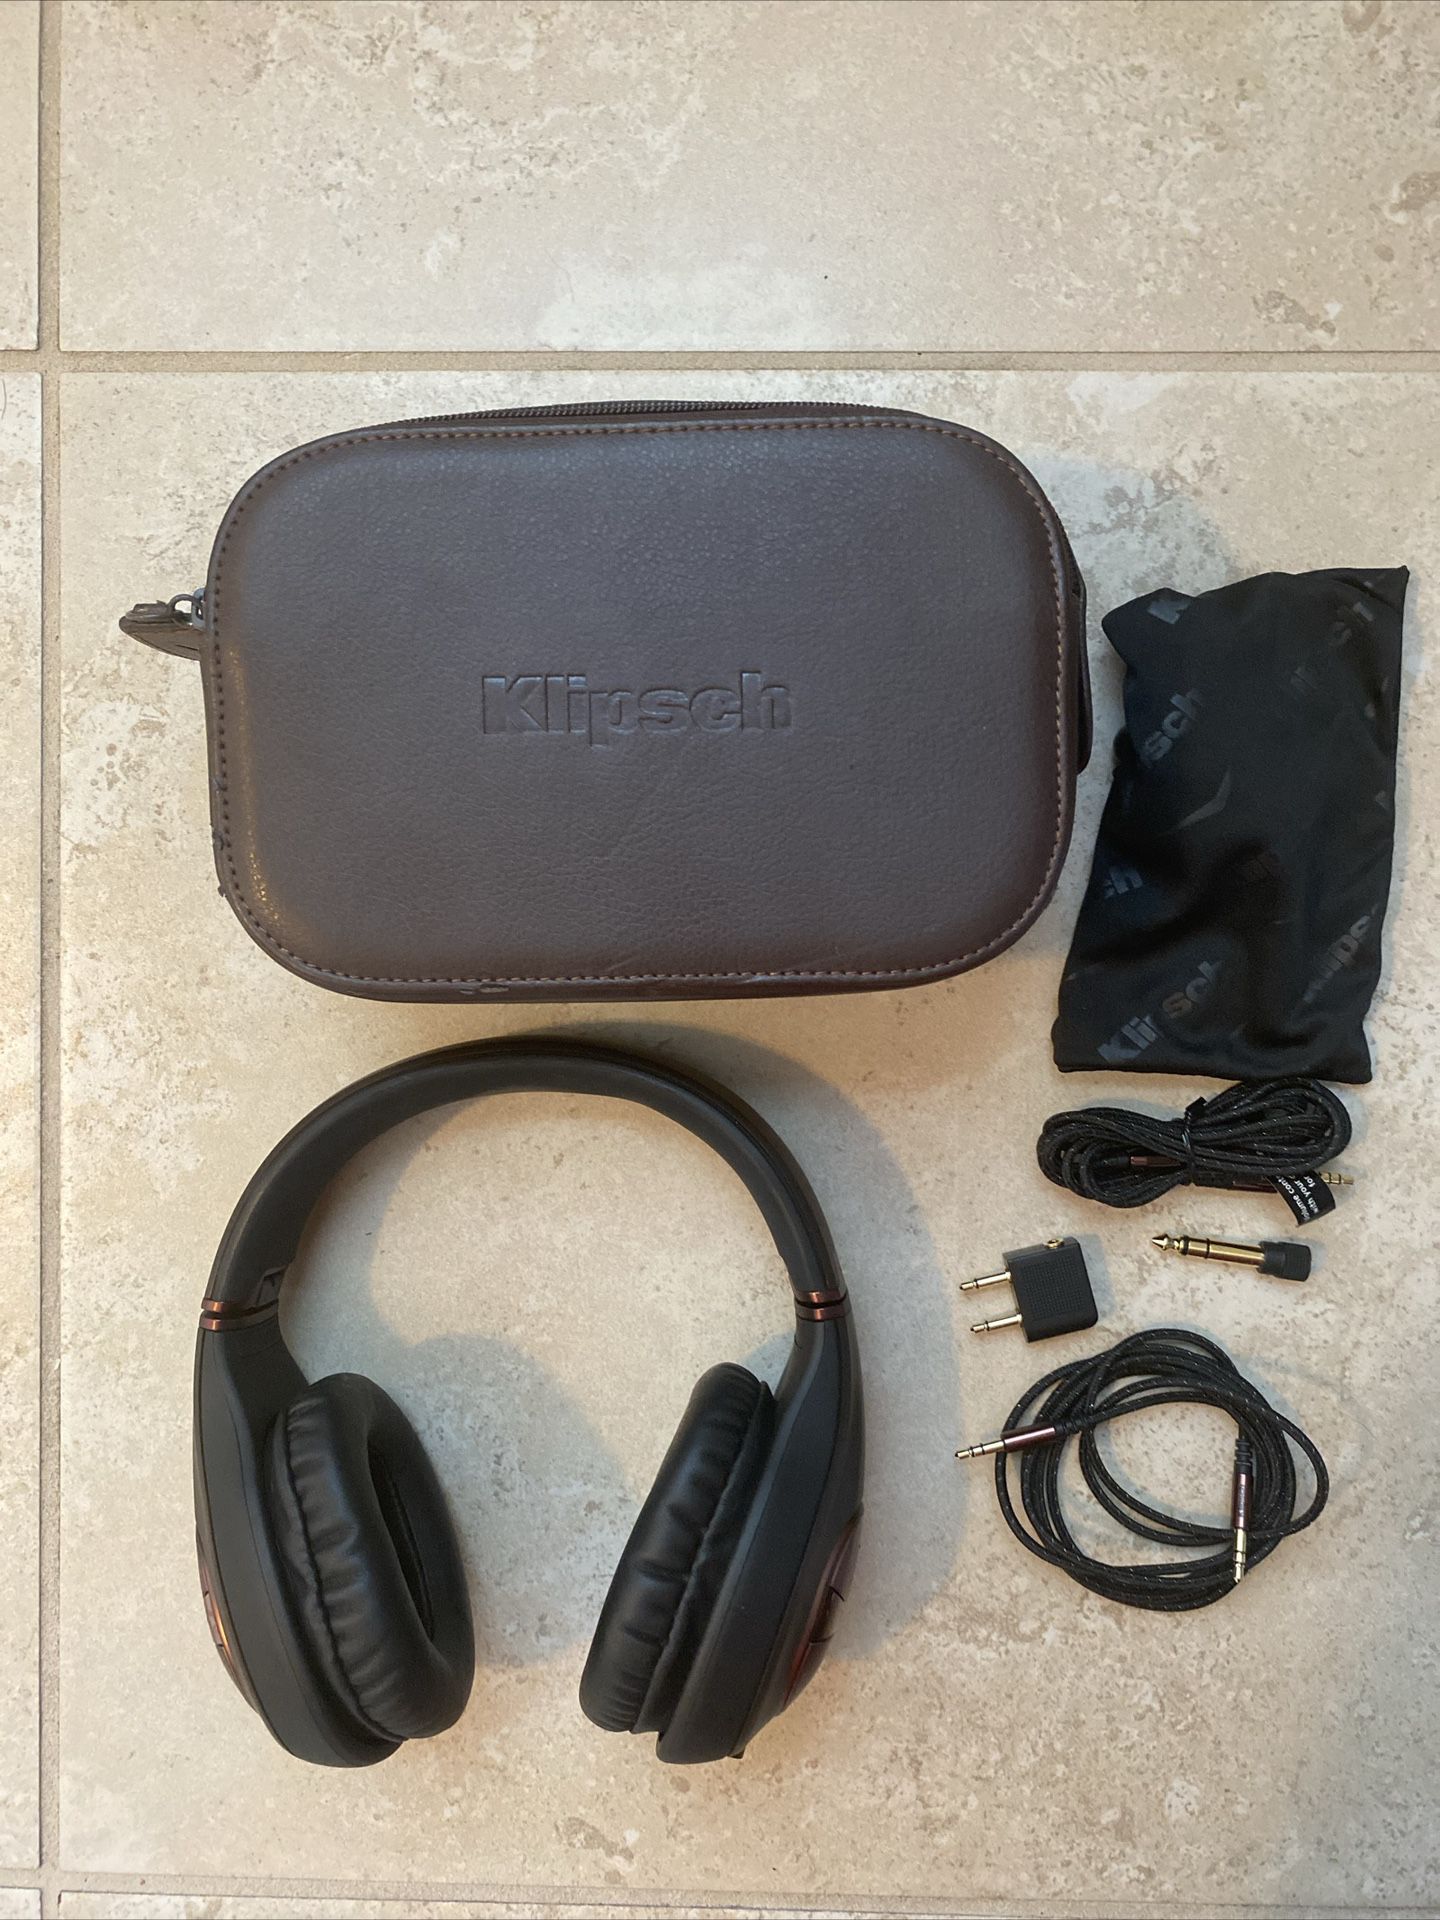 Klipsch Mode M40 Noise-Canceling Wired Headphones